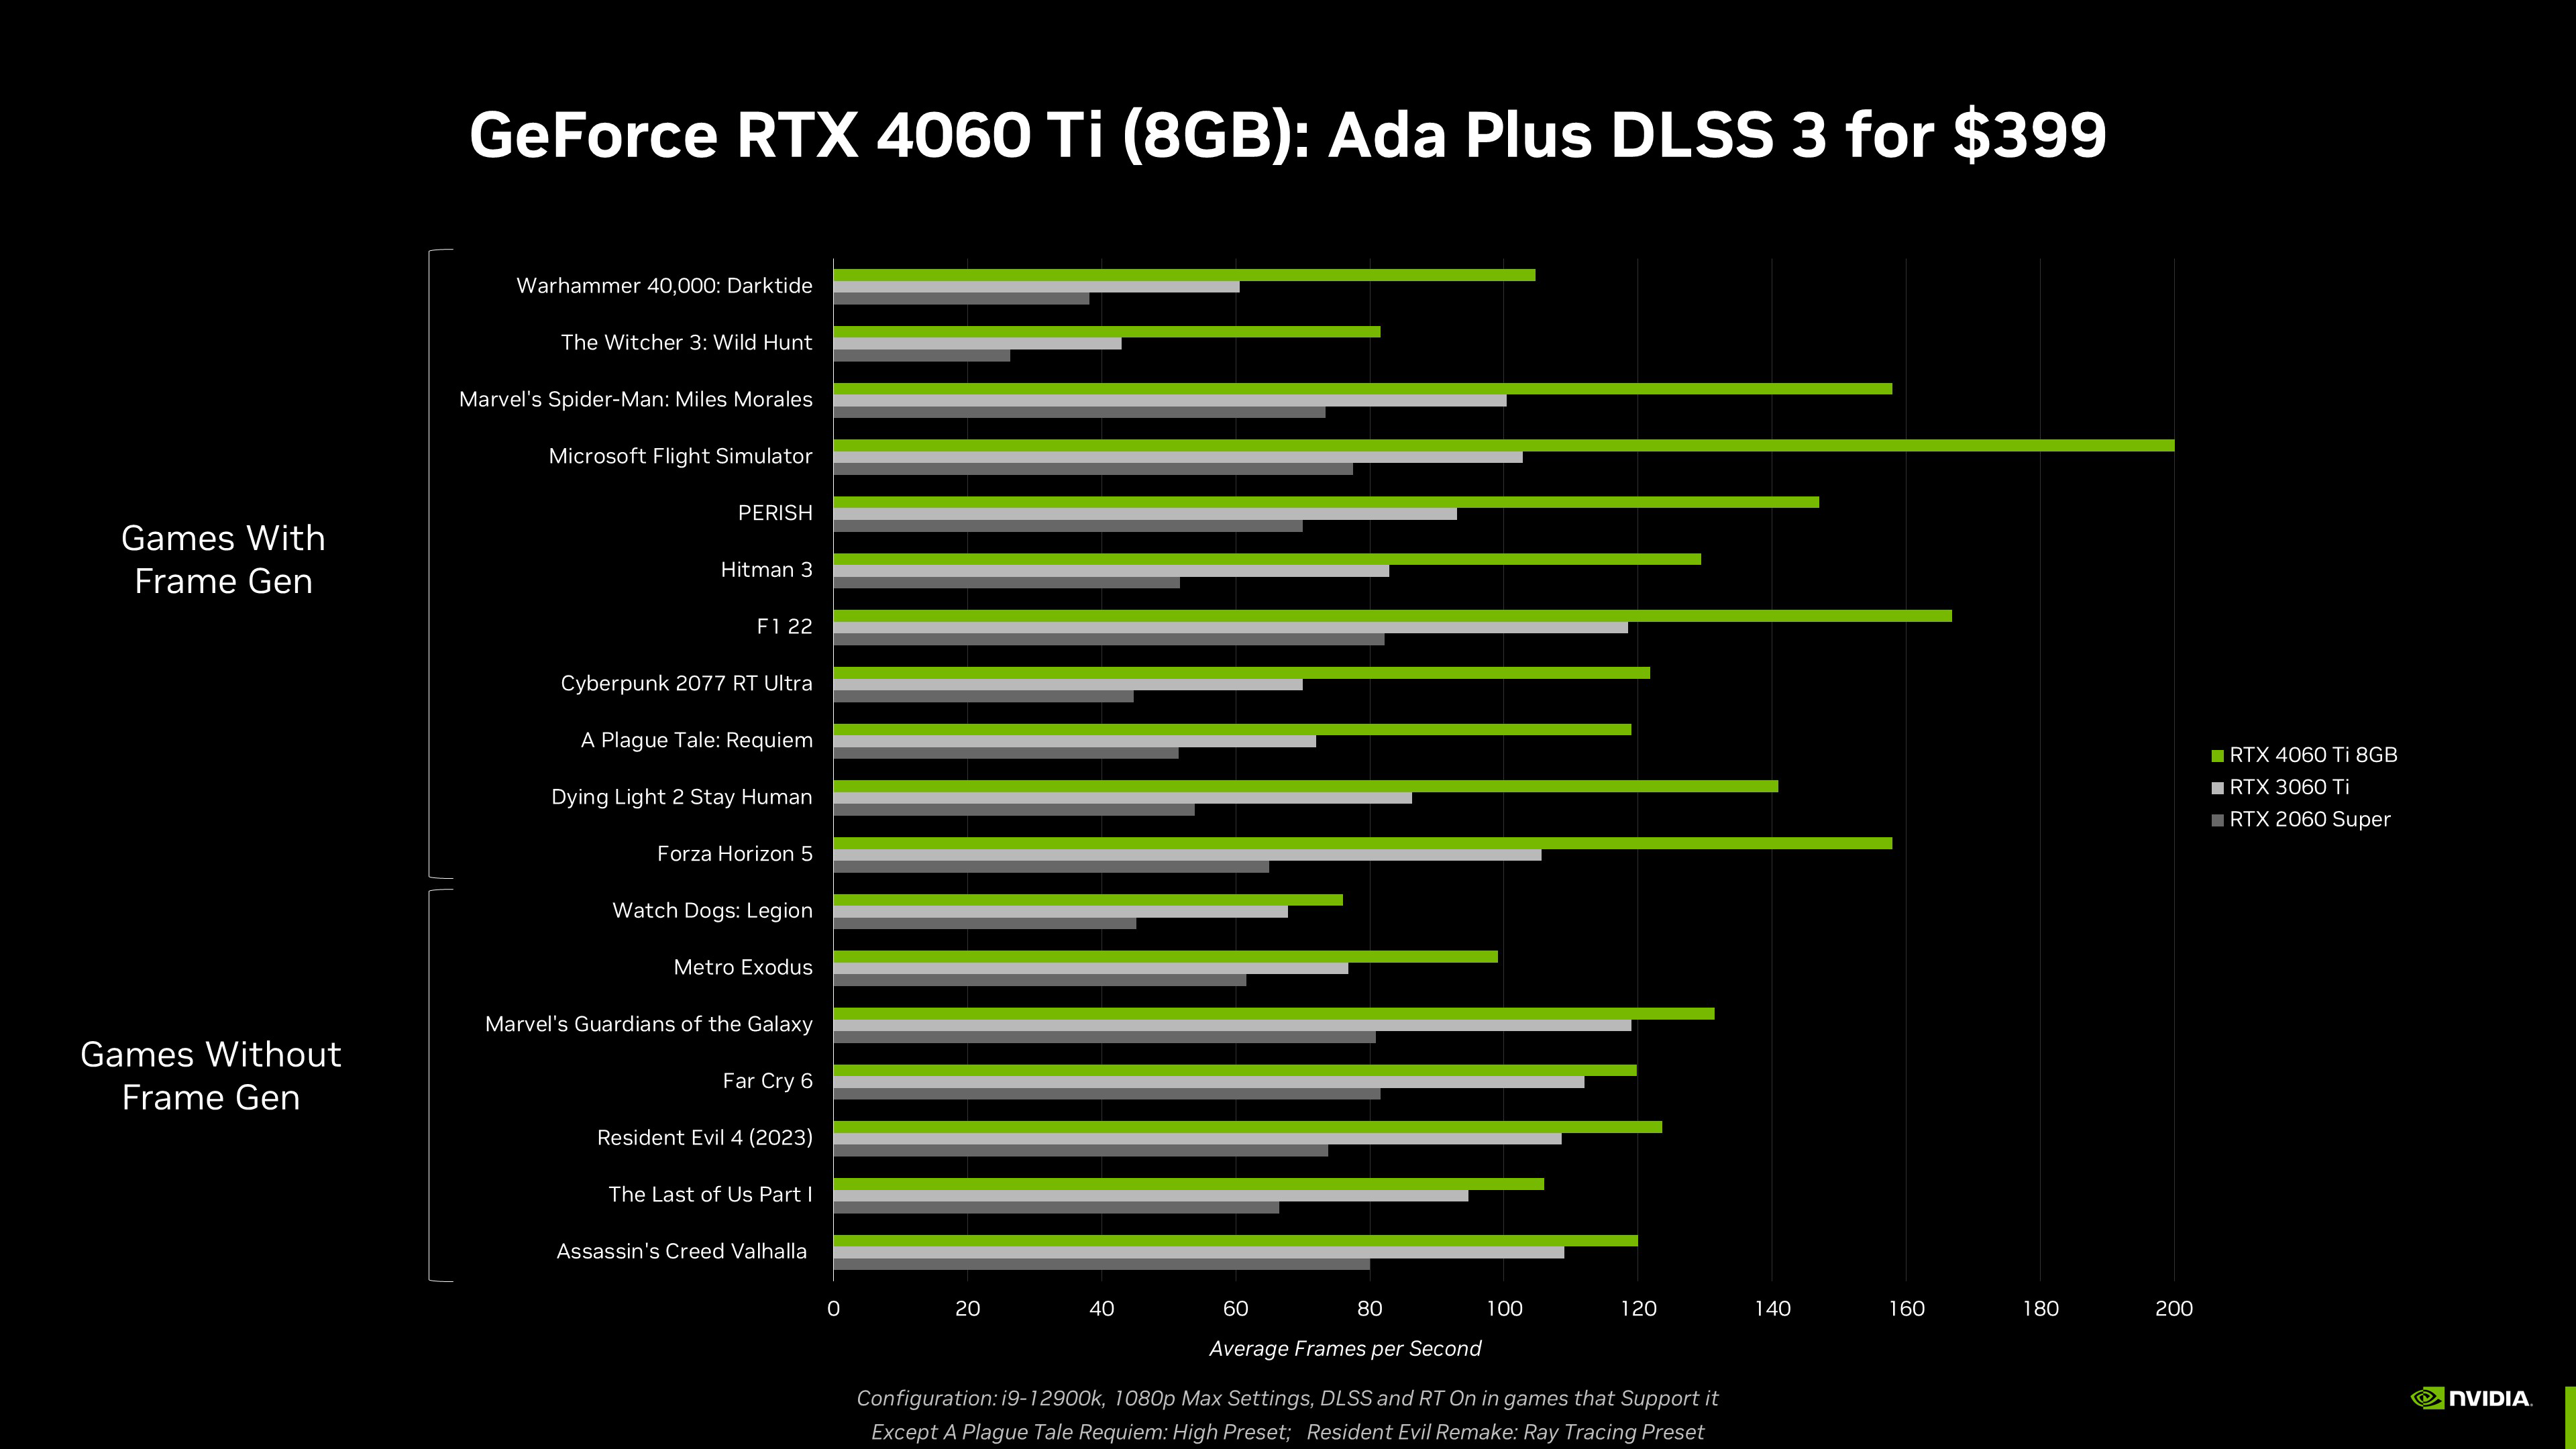 NVIDIA GeForce RTX 4060 Ti with 16GB of VRAM will require 5W more in power